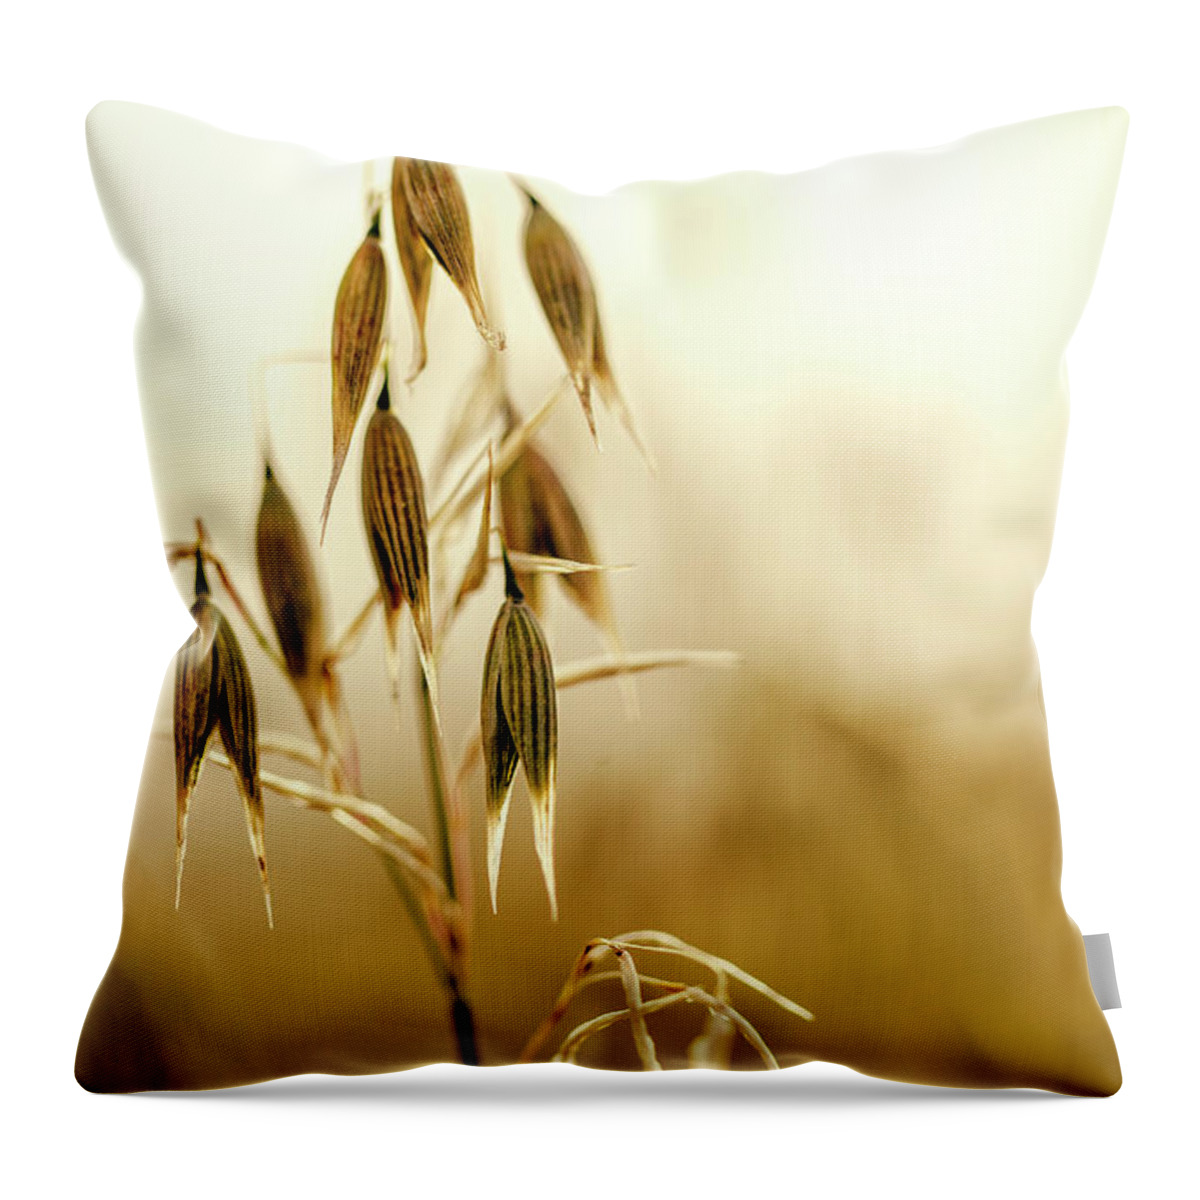 Oat Throw Pillow featuring the photograph Summer Oat by Nailia Schwarz